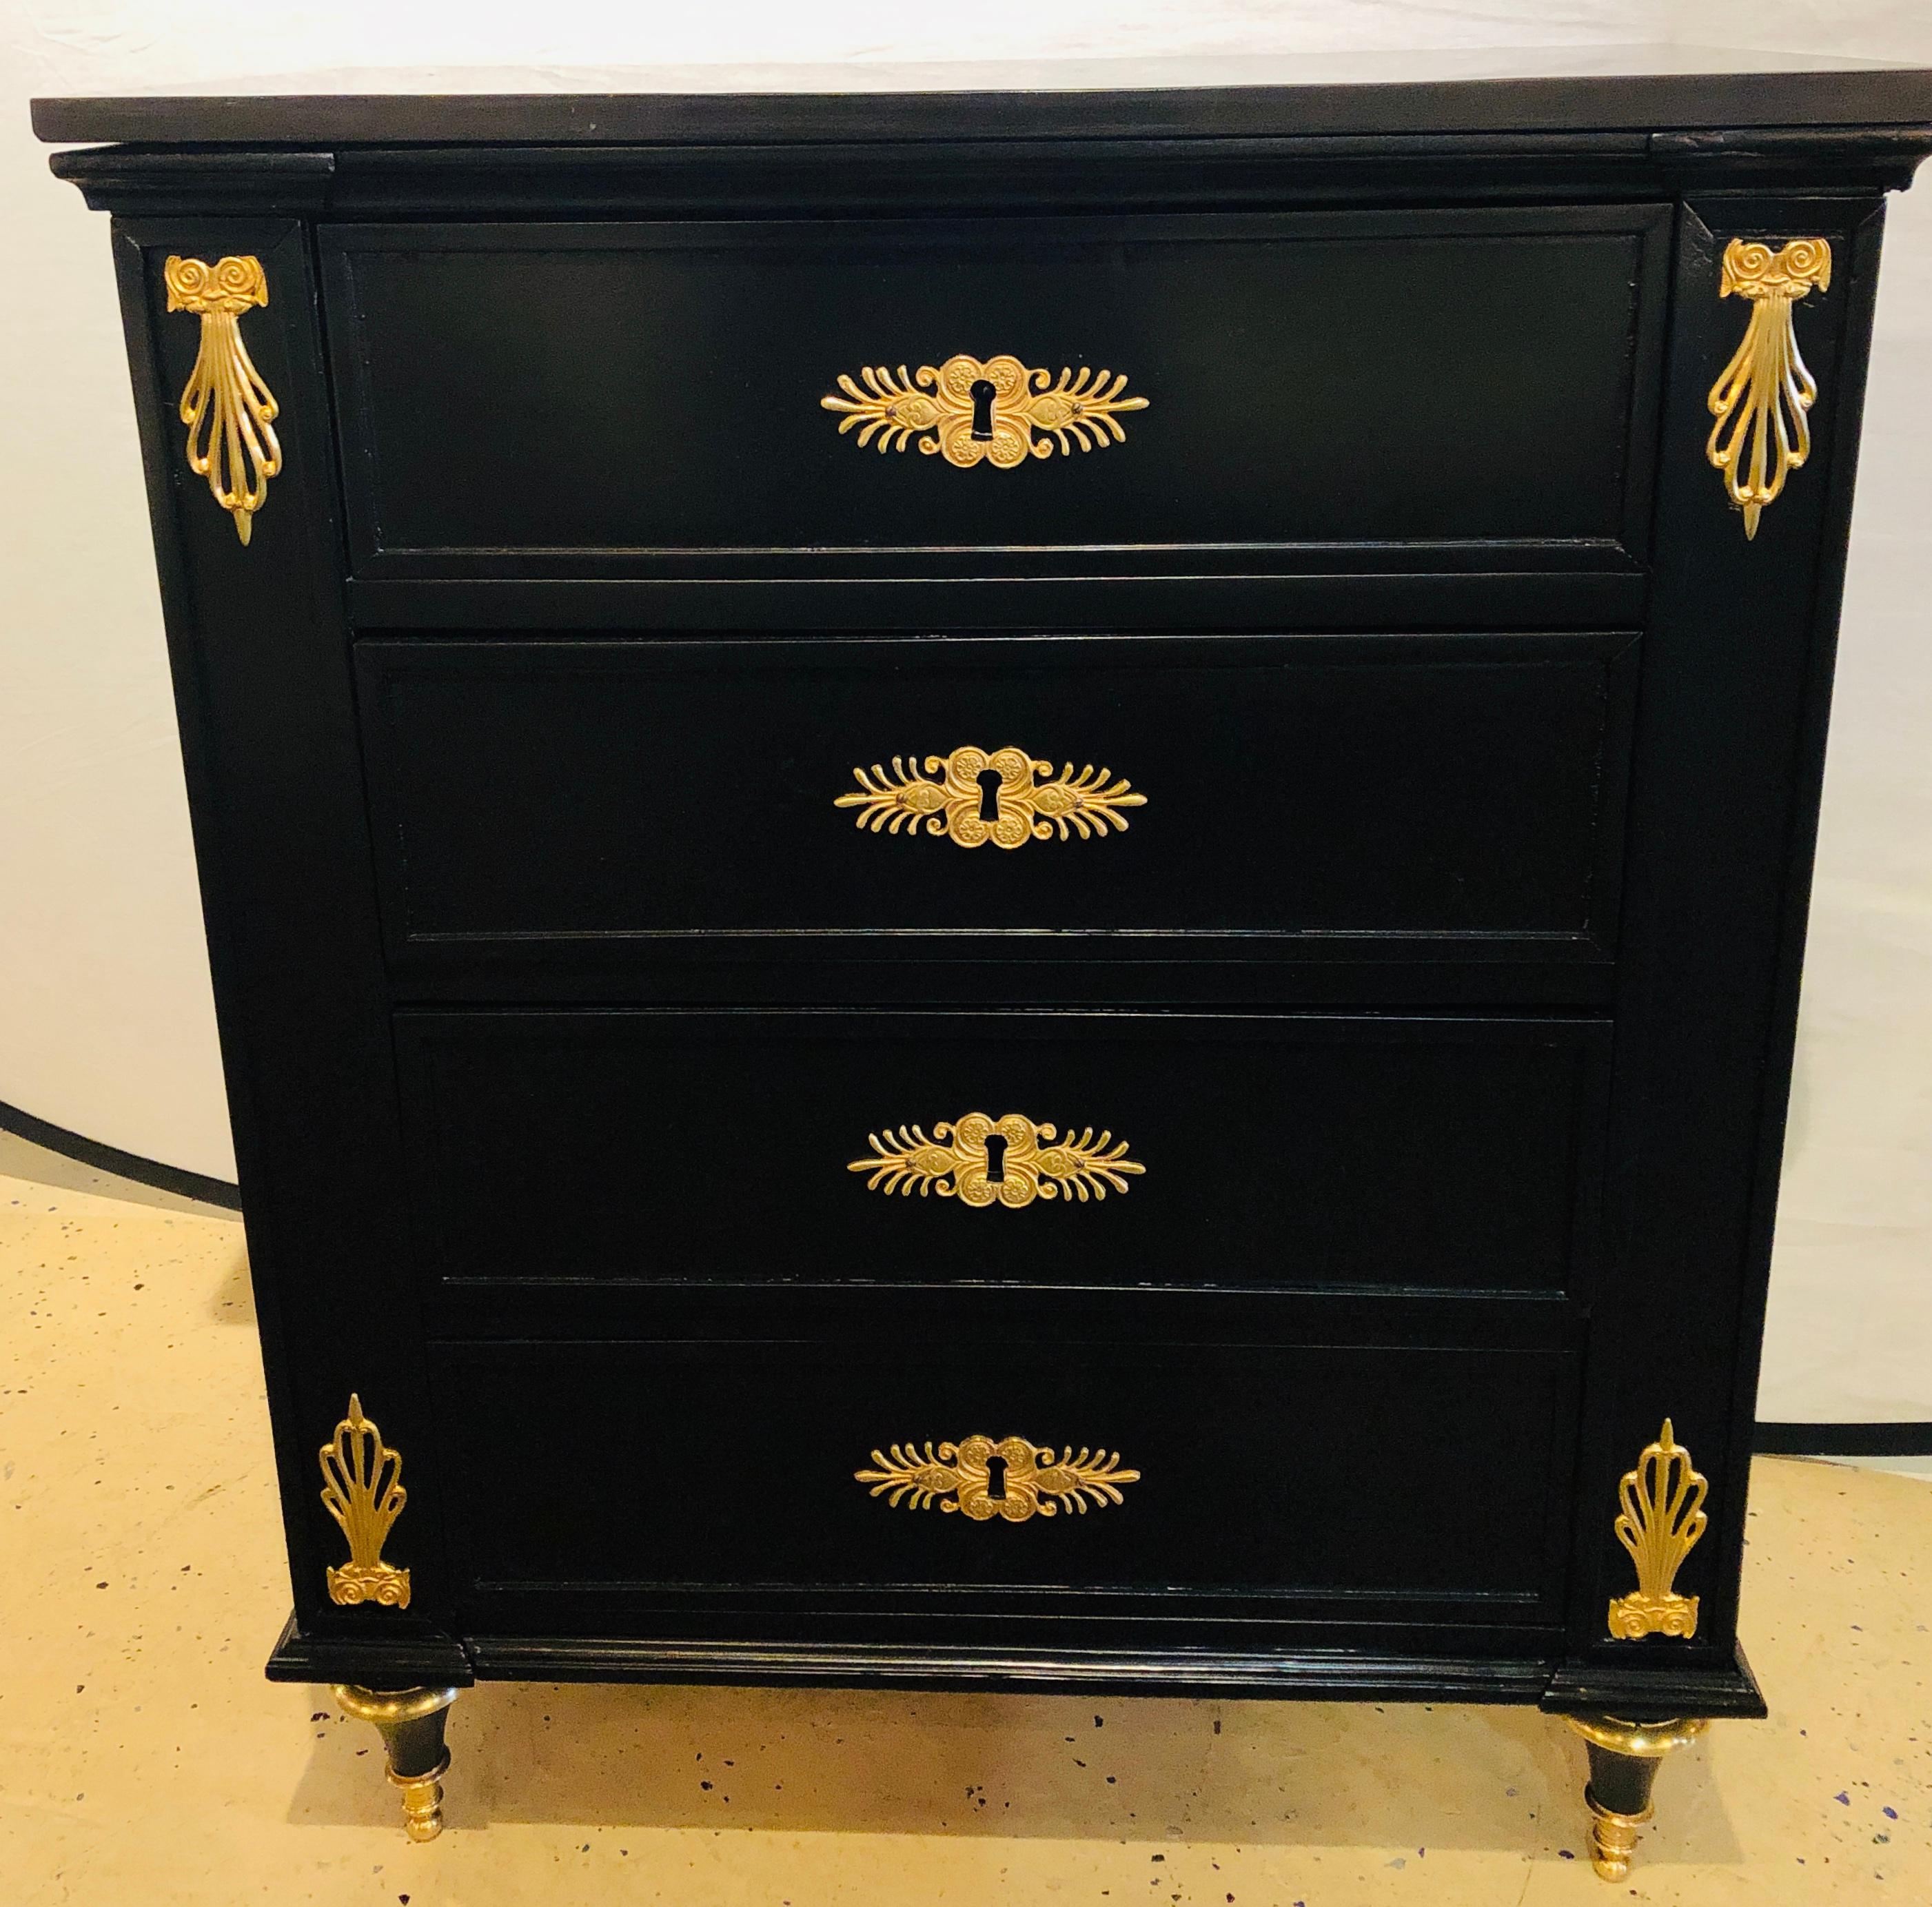 19th century ebony bronze mounted four drawer commode with black marble-top. This early commode or chest having been fully done over in an ebony finish later on in its life is simply stunning with its bronze mounts and black granite or marble